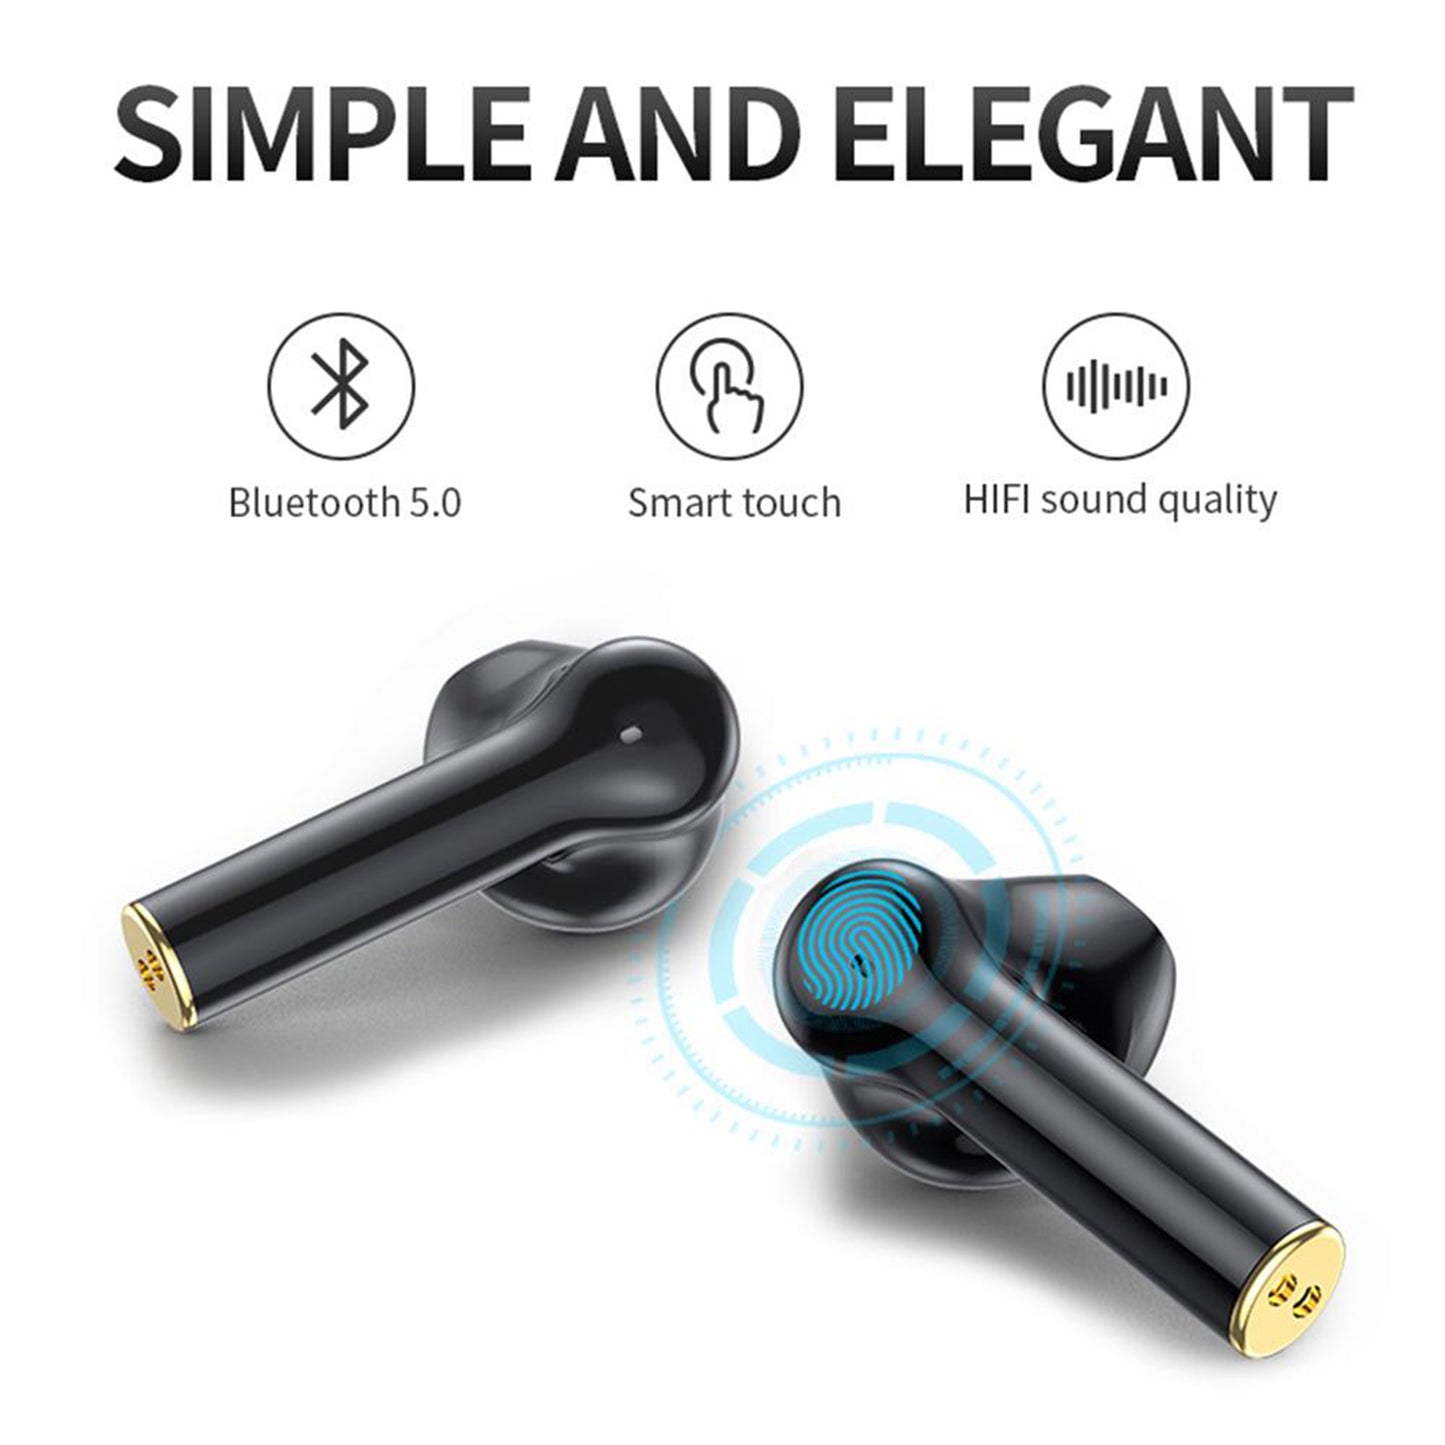 FitSmart Wireless Earbuds Earphones Bluetooth 5.0 For IOS Android In Built Mic